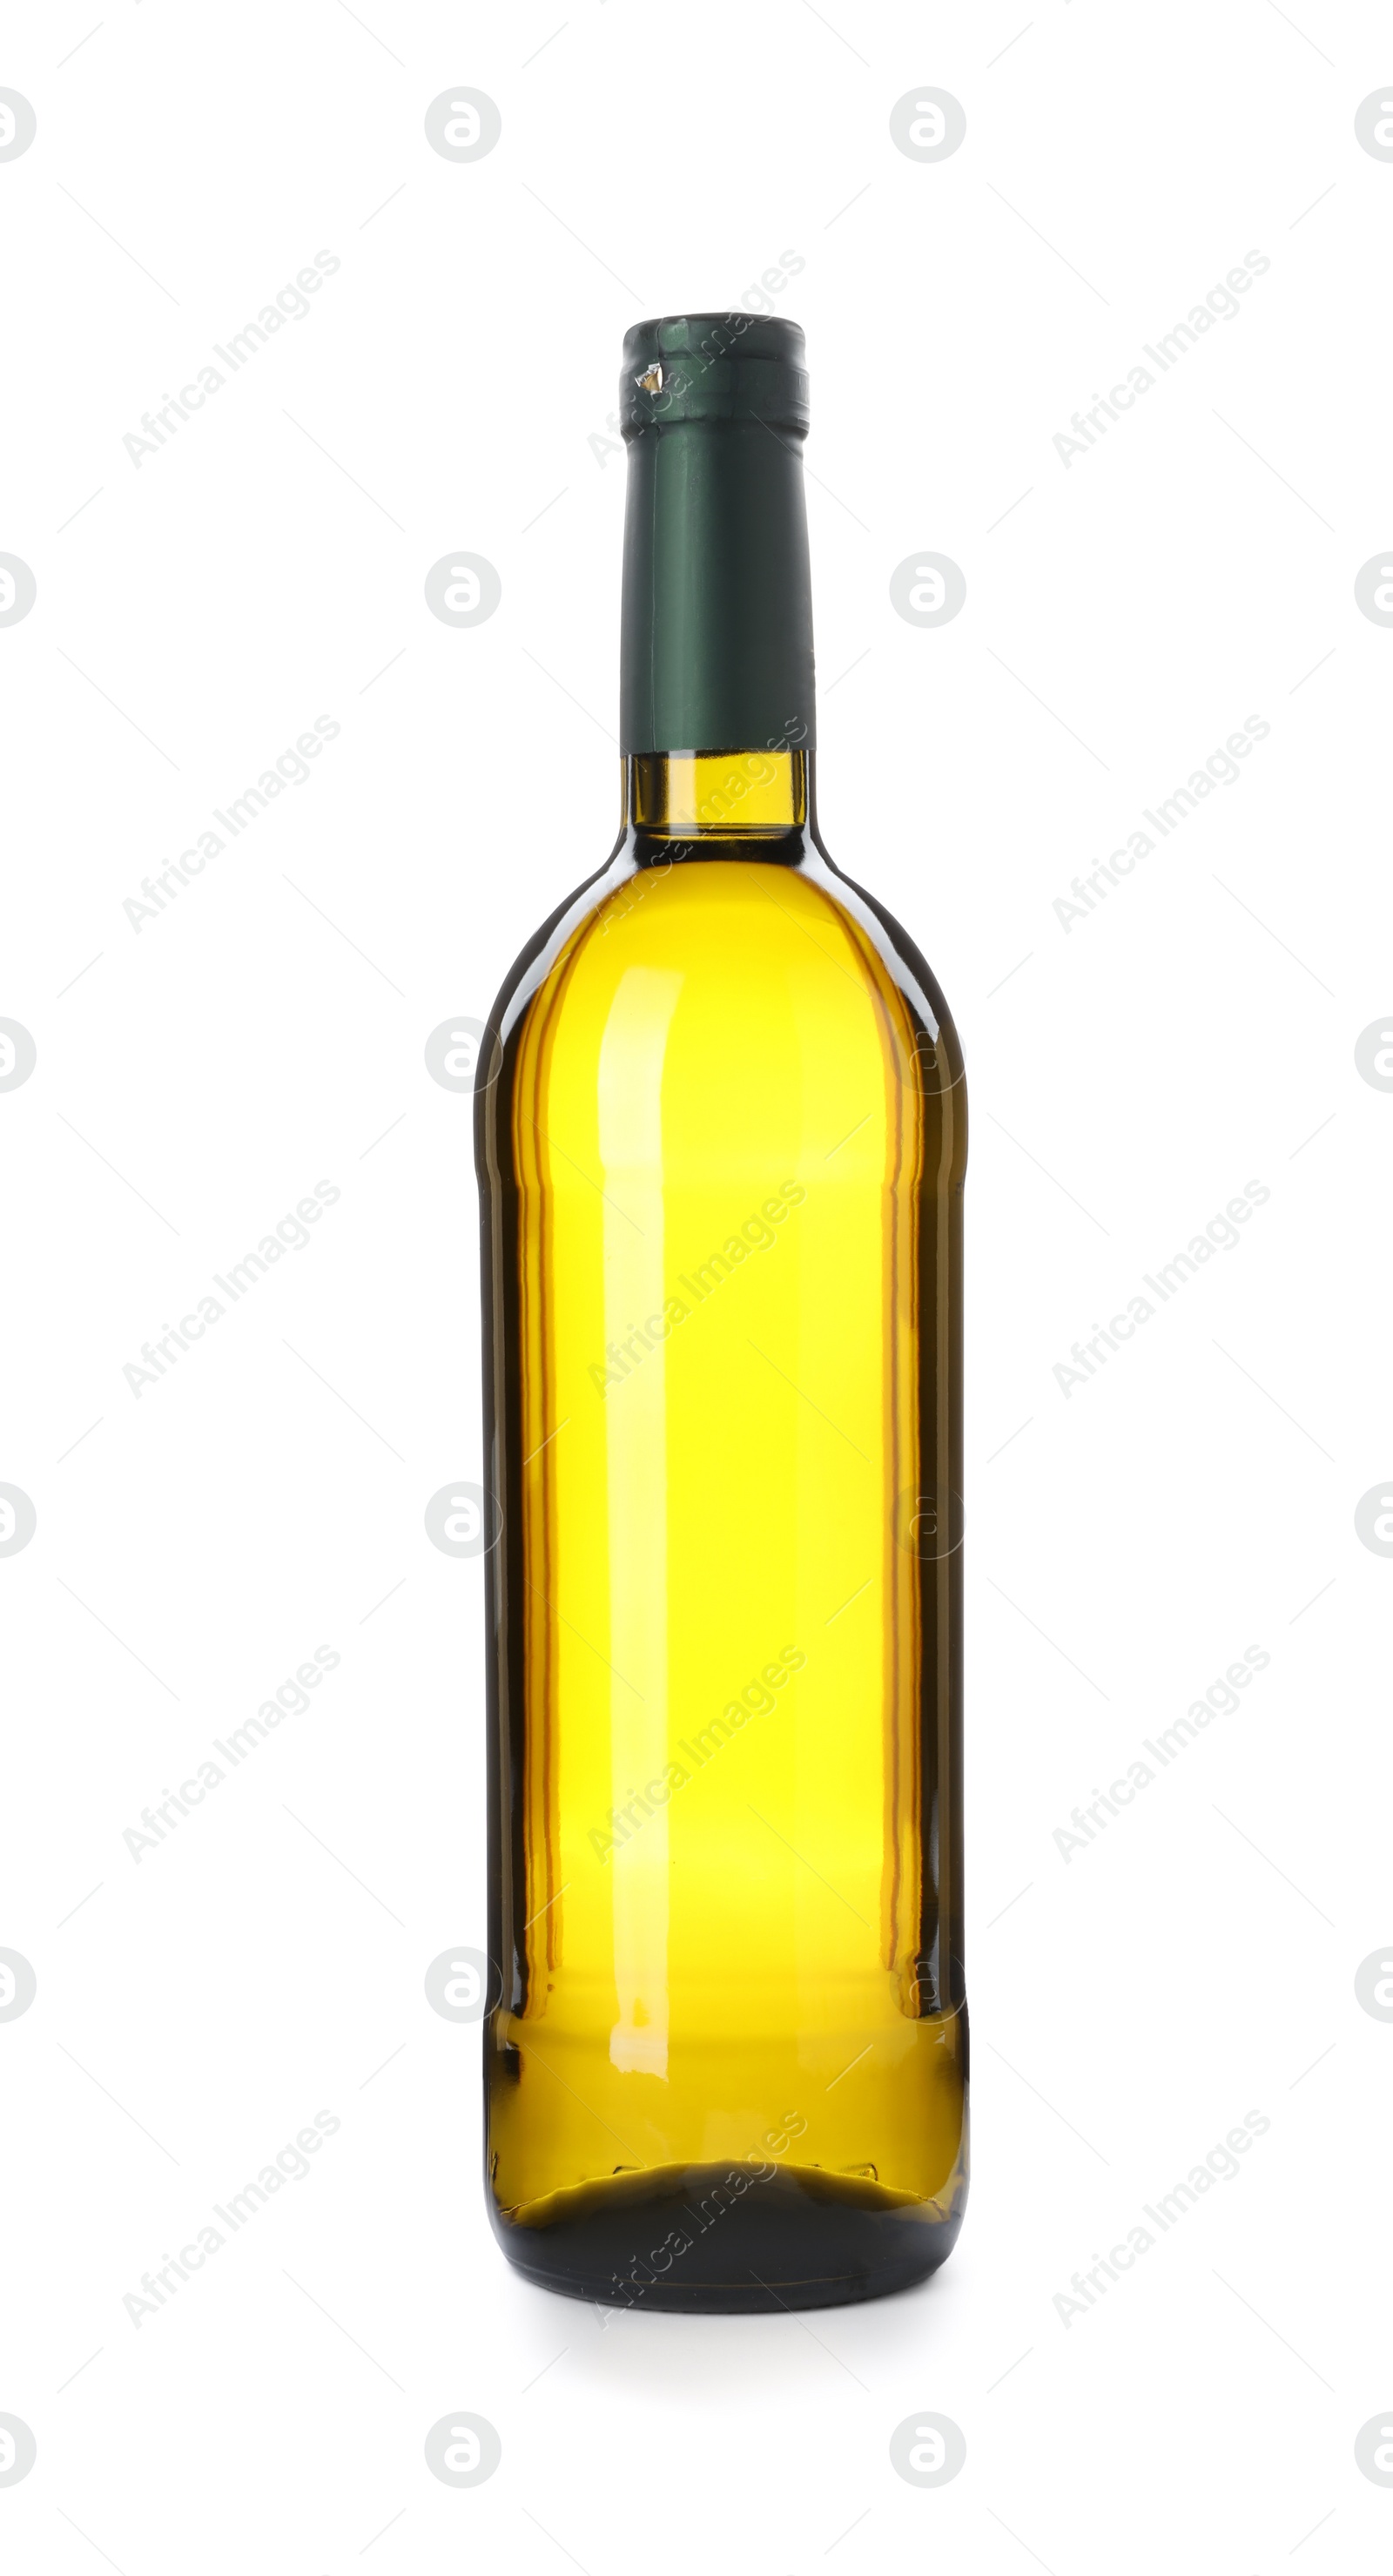 Photo of Bottle of expensive wine on white background